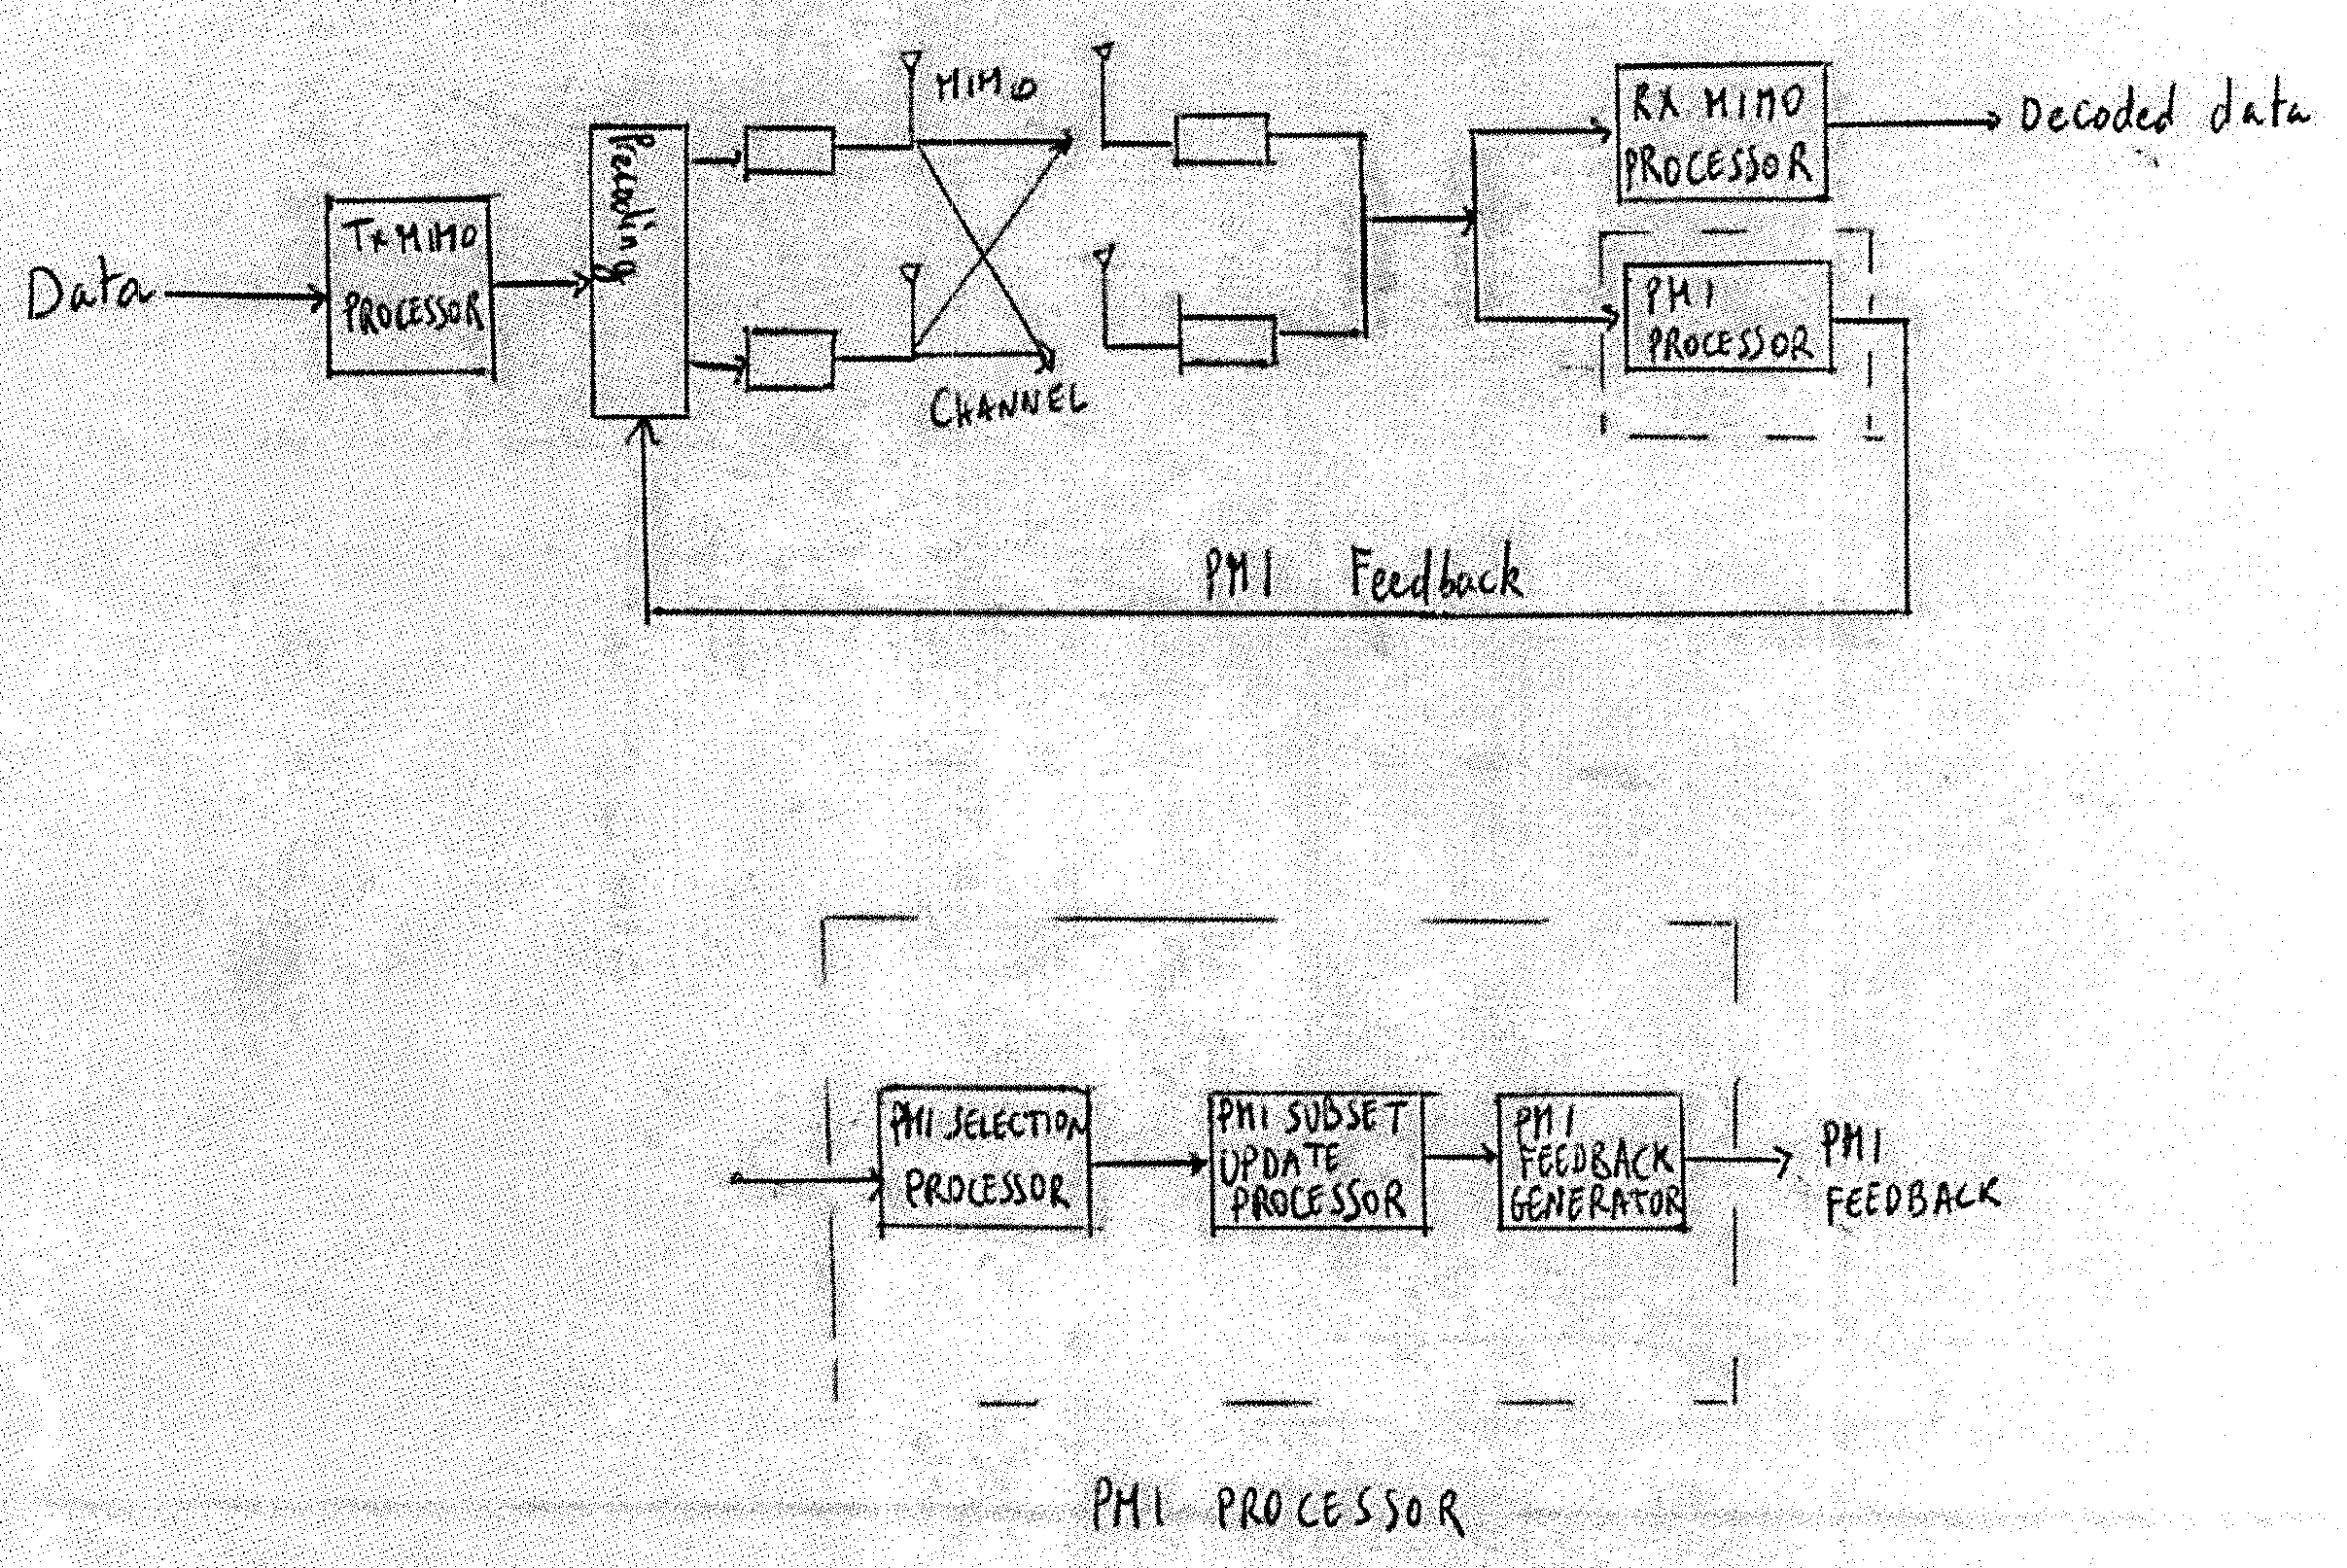 System and method of wireless communication